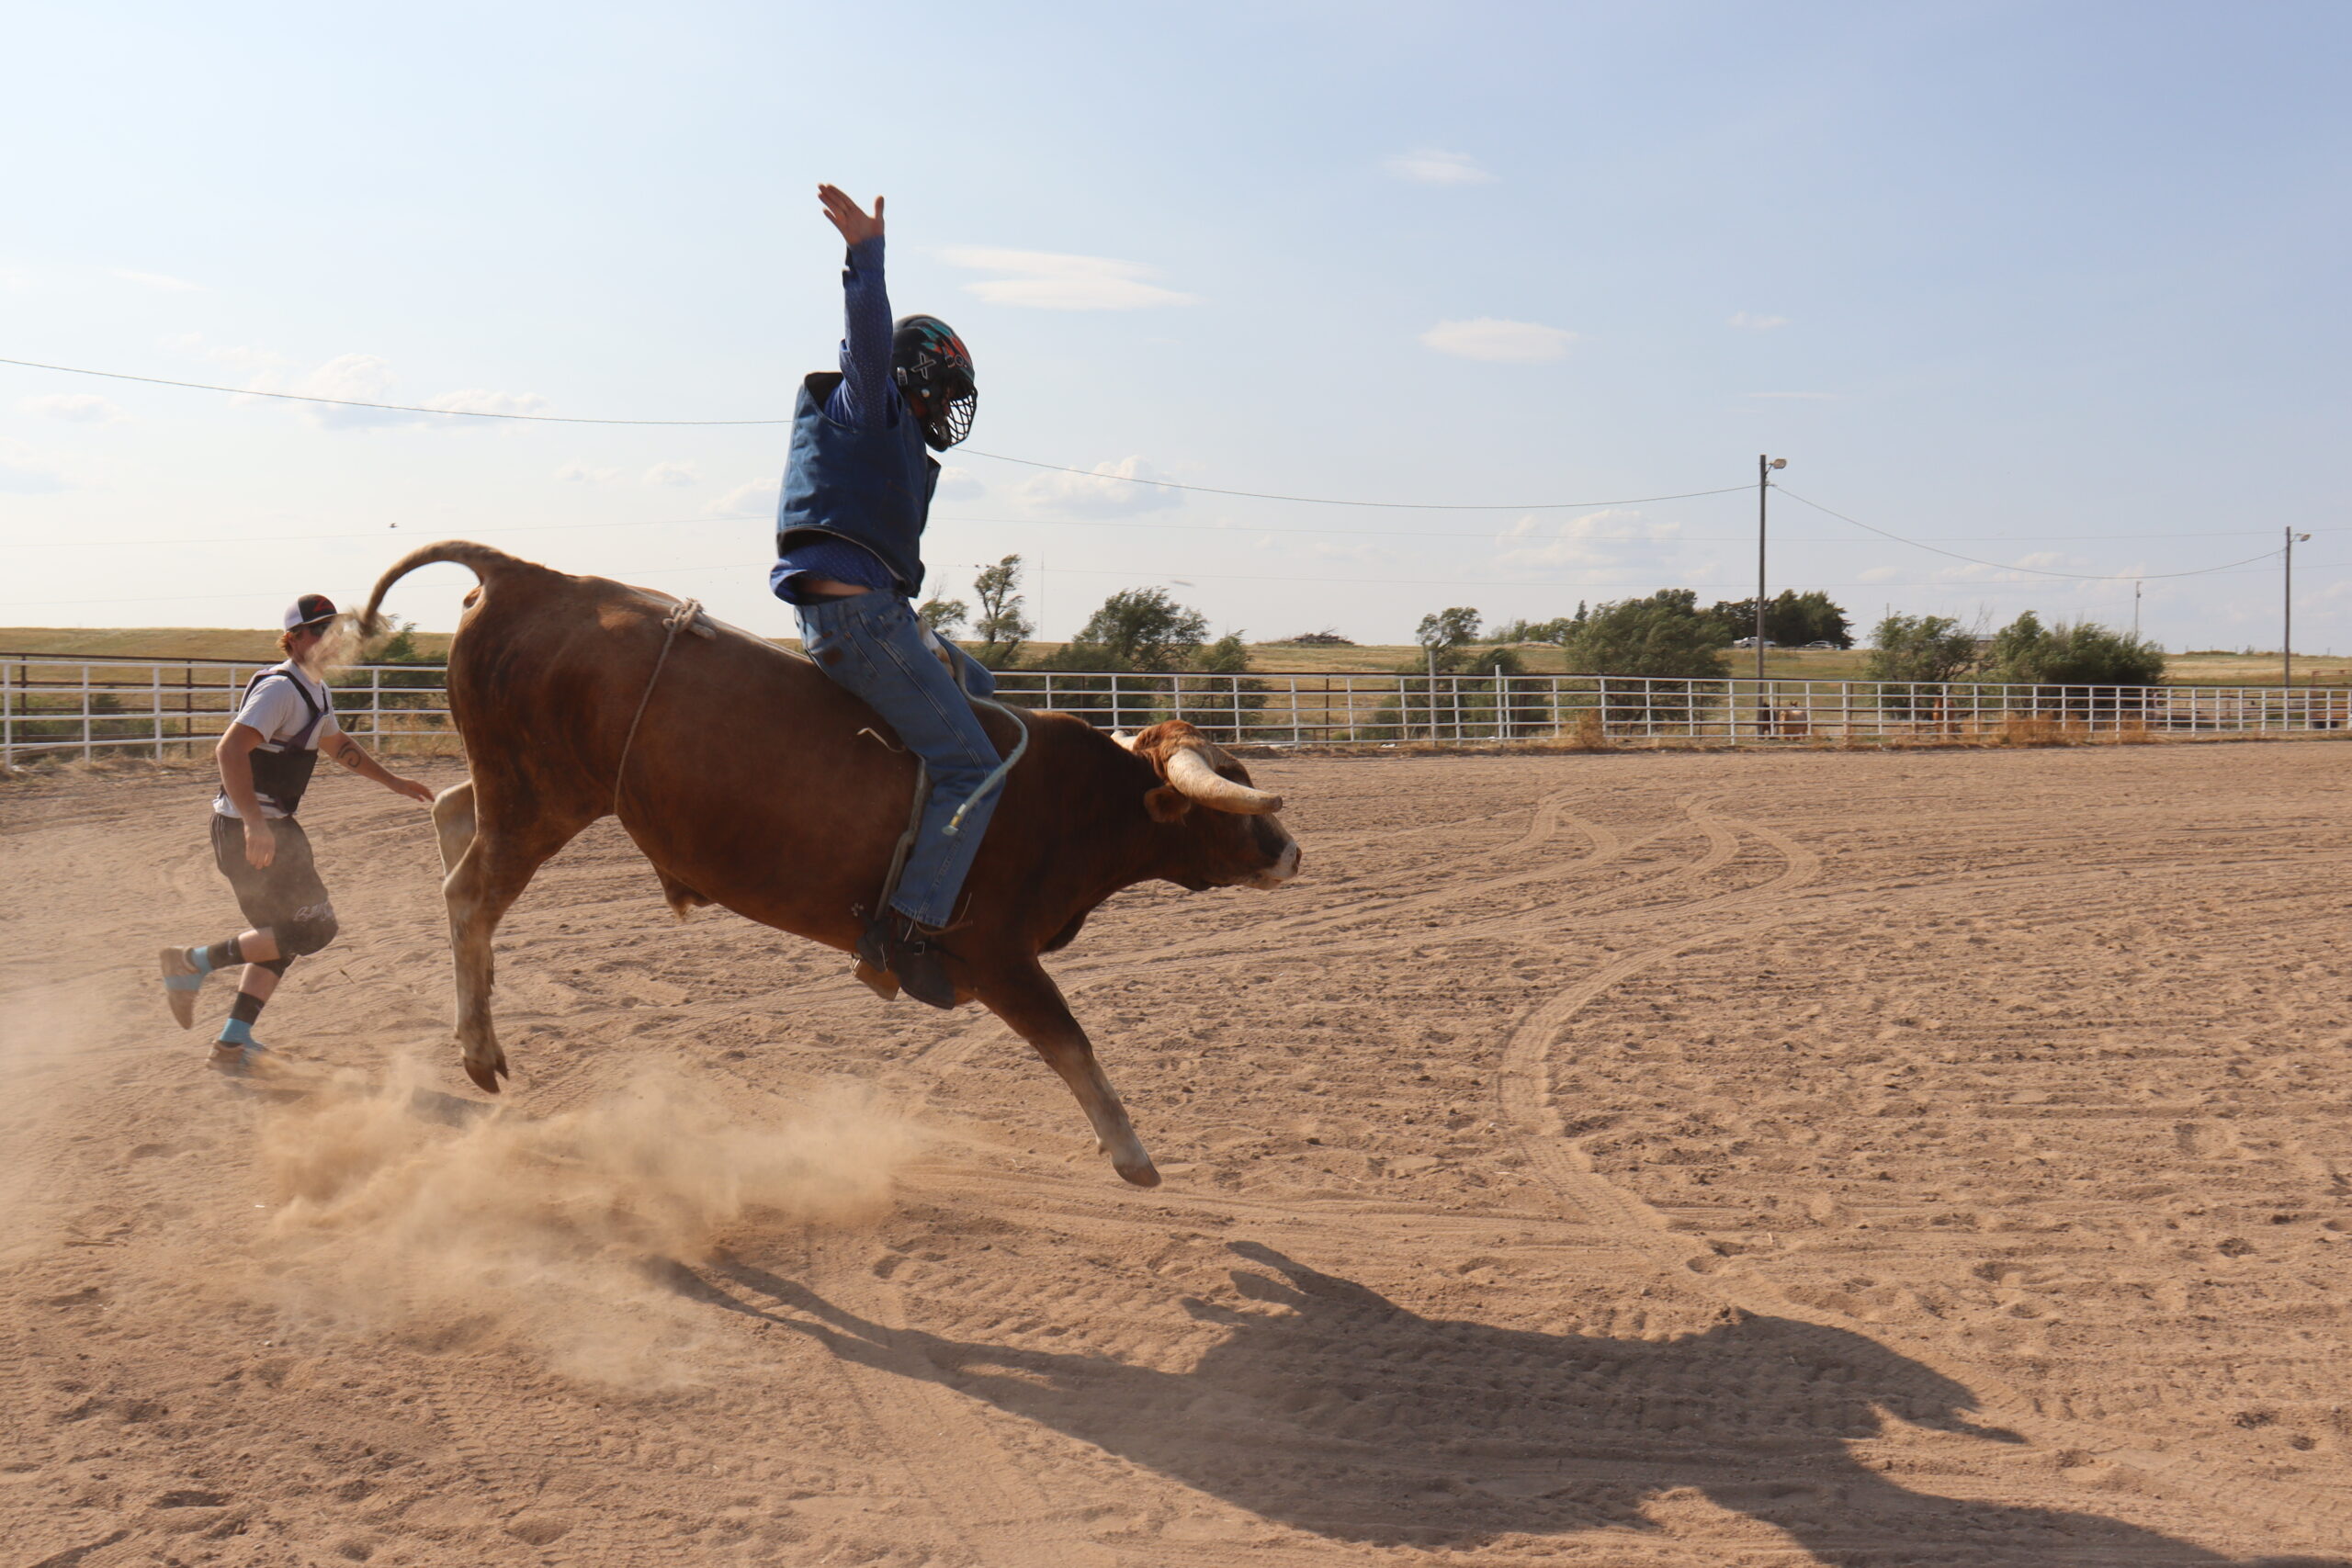 Tyler Bauer rides a bull during rodeo roughstock practice on Sept. 28. [Photo by Lance Ziesch]